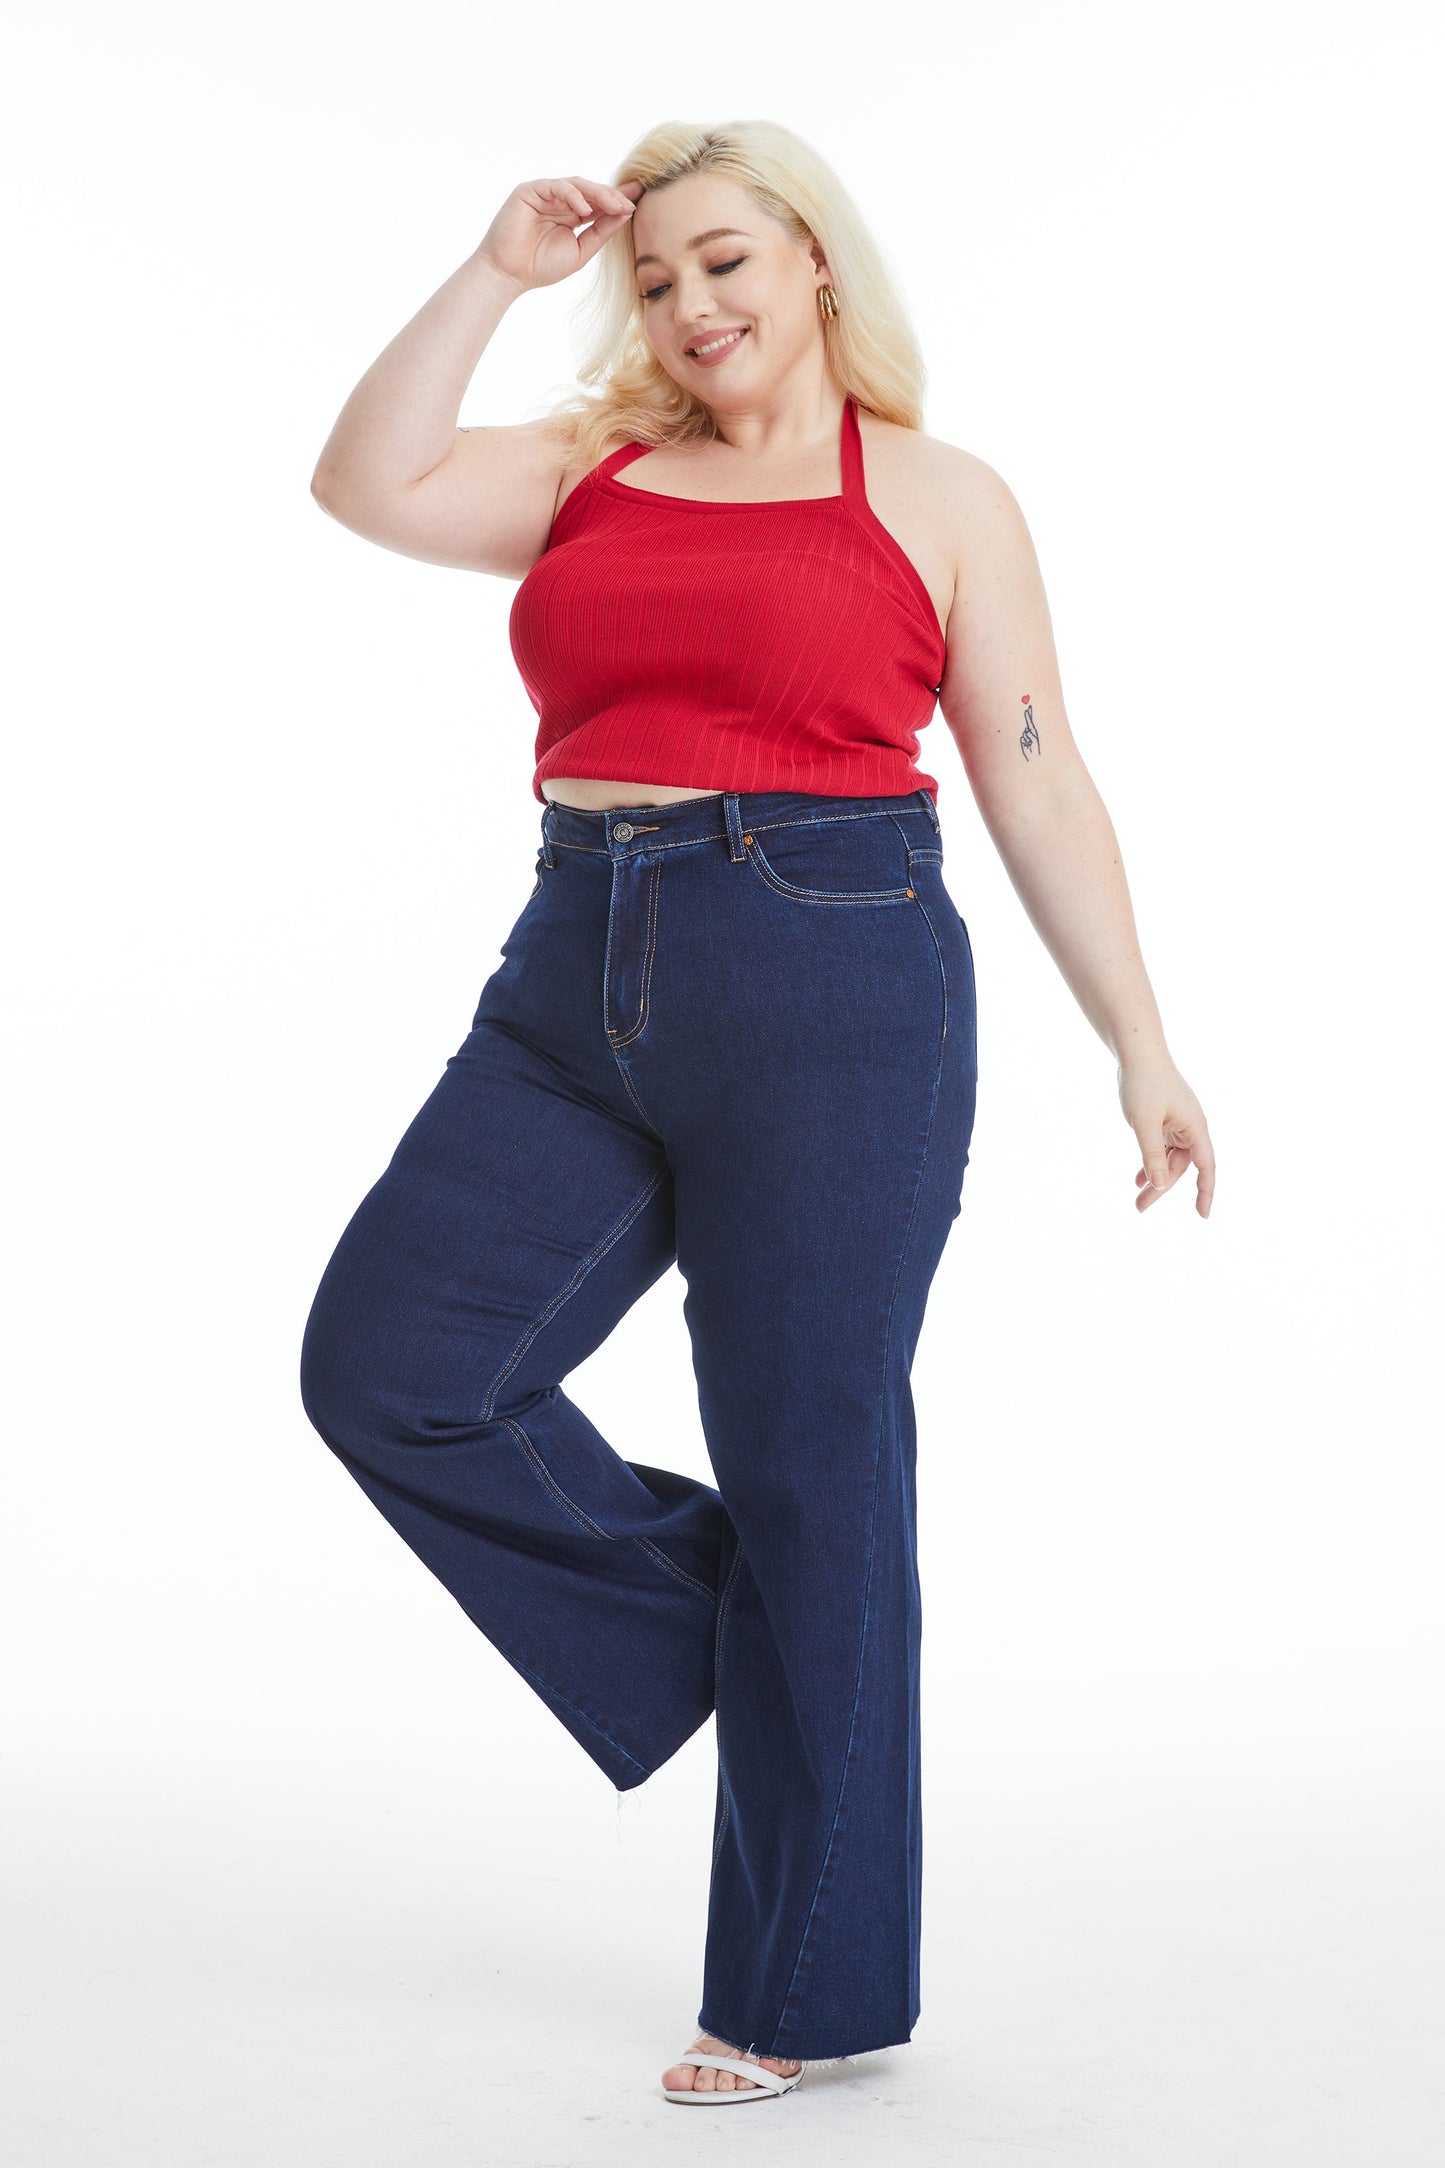 BETH HIGH RISE WIDE LEG JEANS BYW8052-P DEEP WATER PLUS SIZE